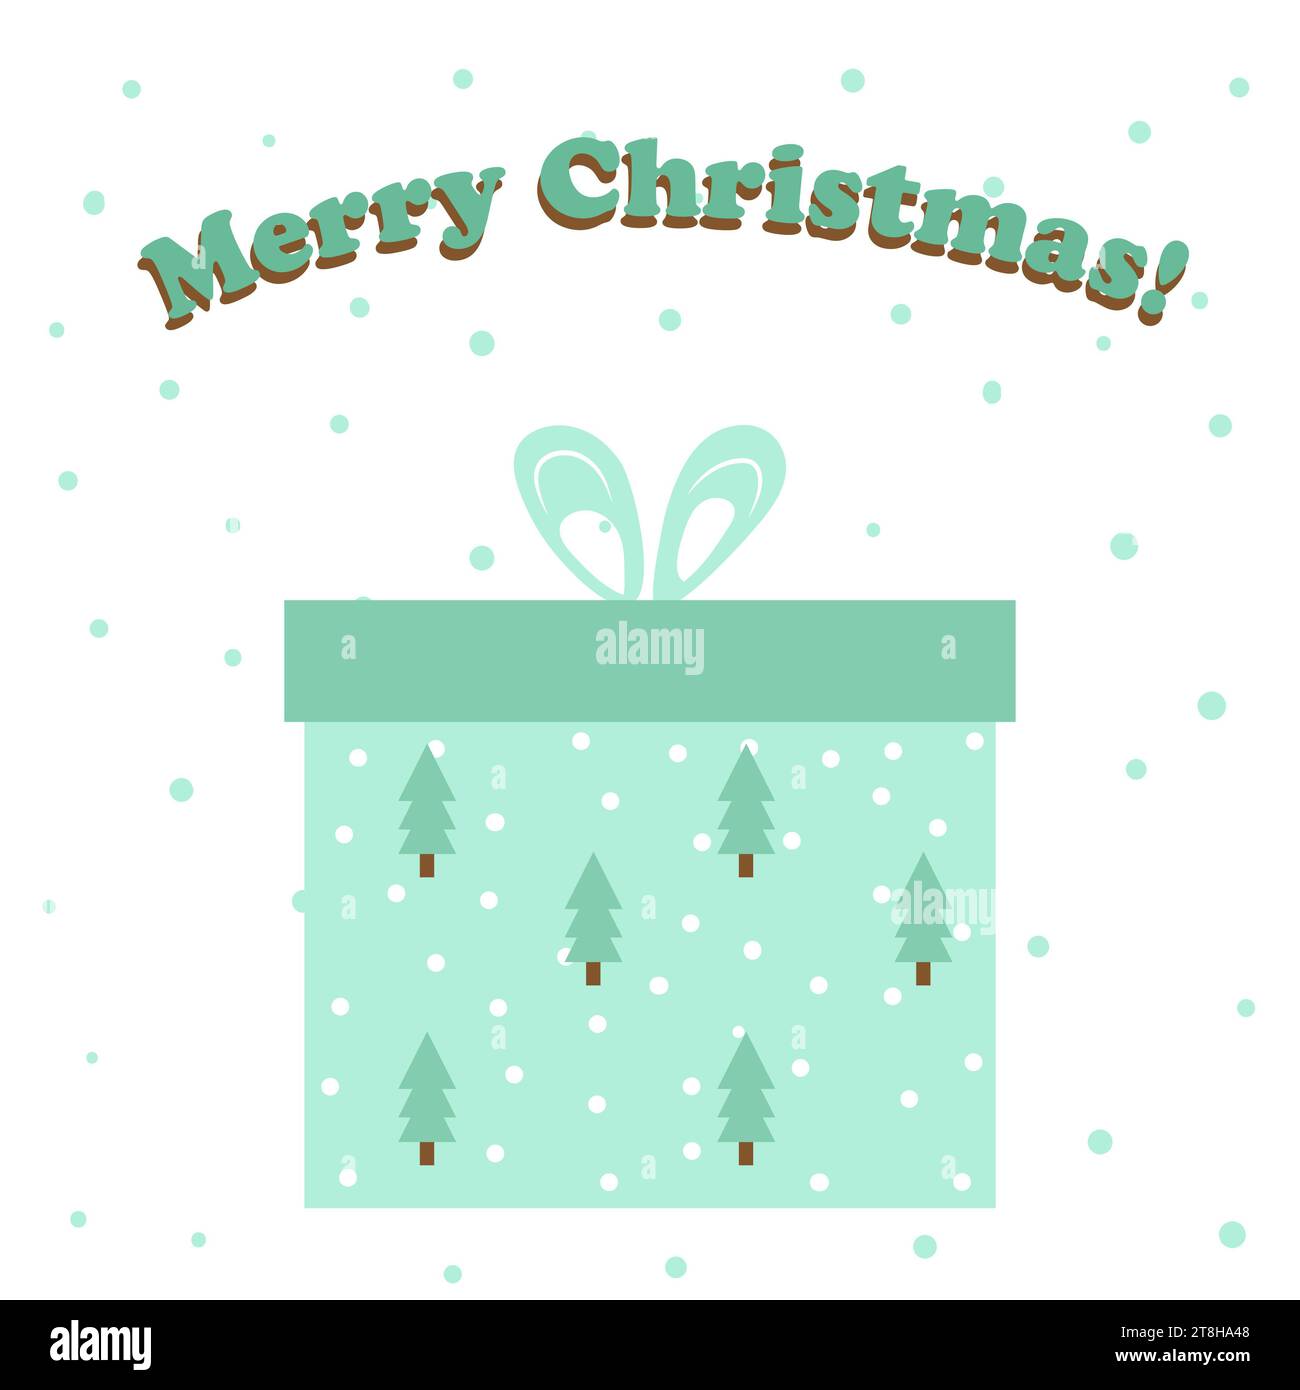 A Merry Christmas greeting card with a green gift box vector illustration. Stock Photo